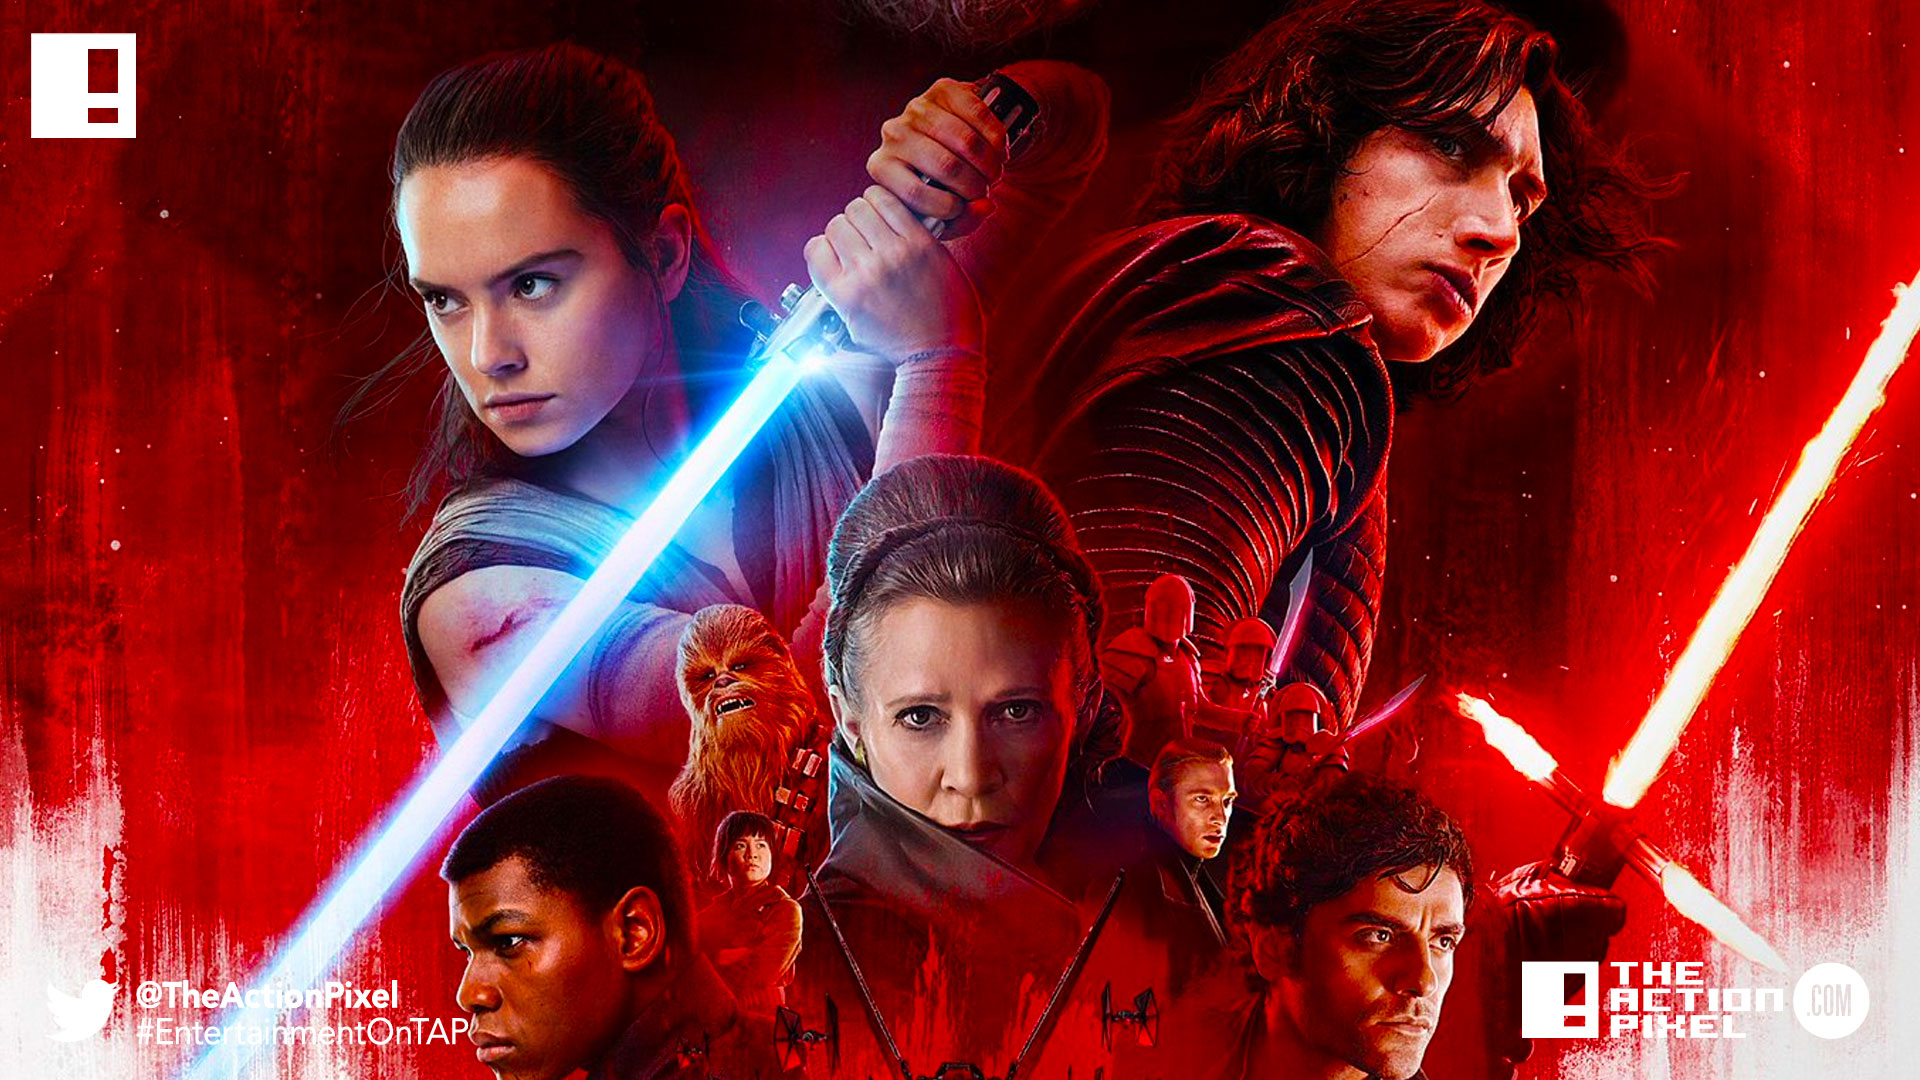 the last jedi, star wars, star wars: the last jedi, mark hamill, luke skywalker, princess leia,carrie fisher, rey,the action pixel, entertainment on tap,kylo ren, photographs,image,poster